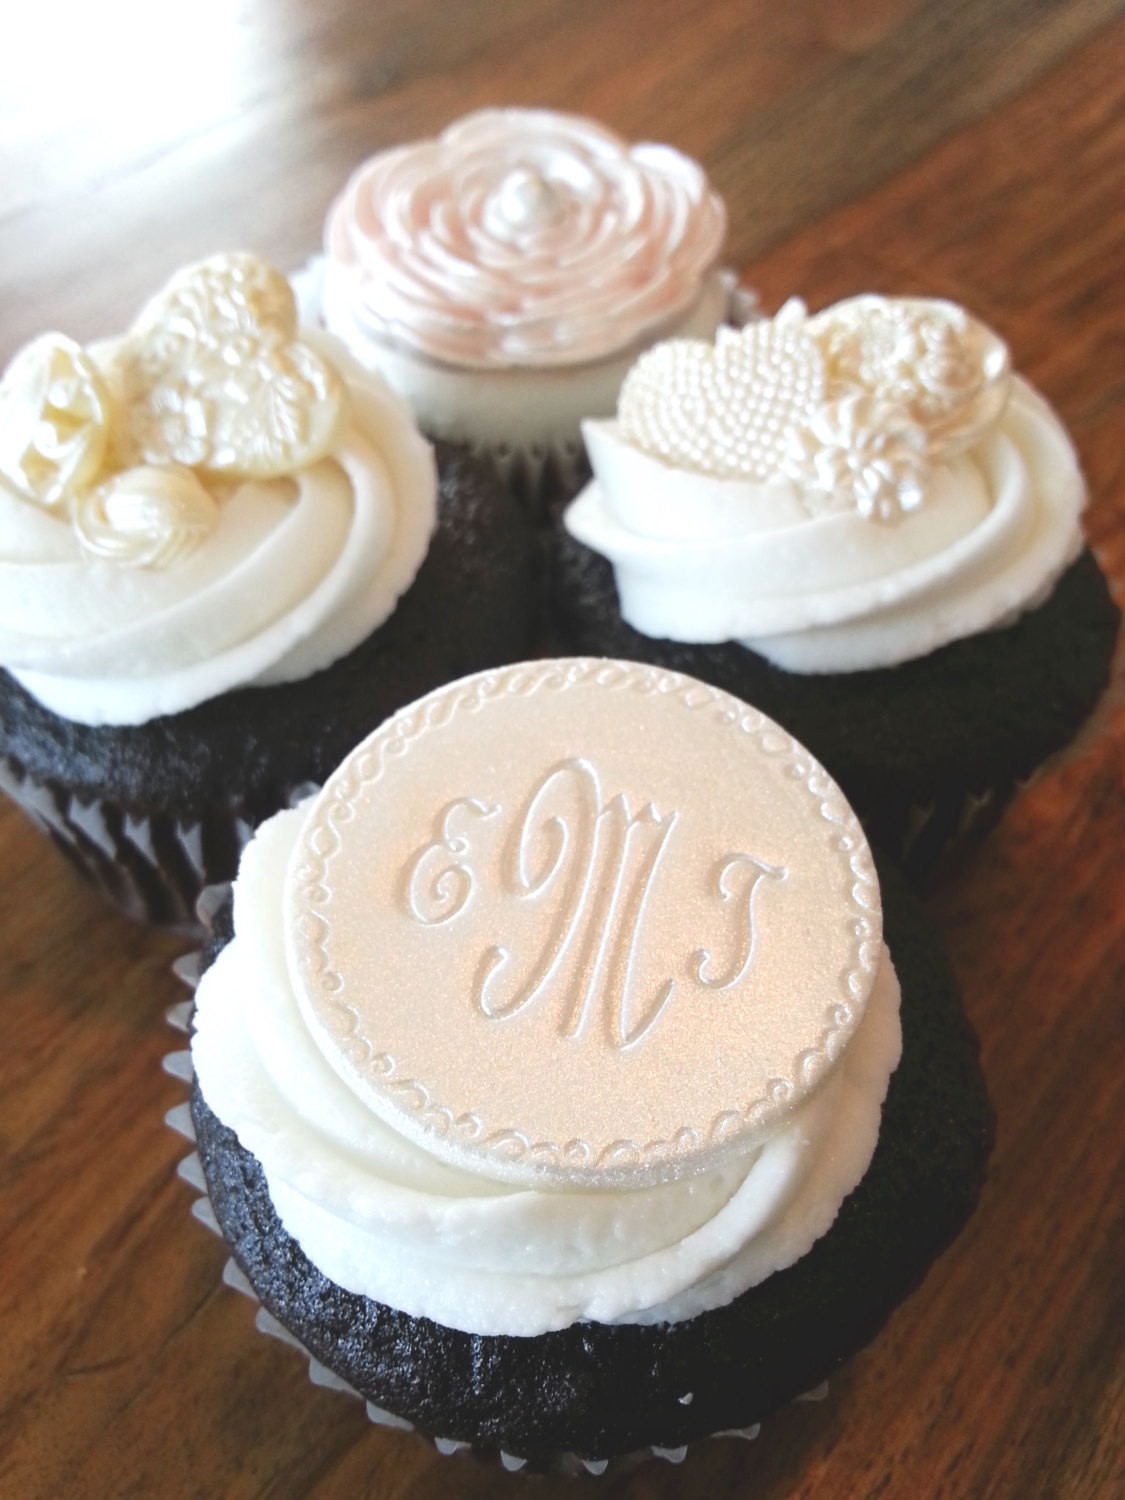 Wedding Cupcake Decorations
 Monogrammed Personalized Cupcake Toppers Edible Cupcake